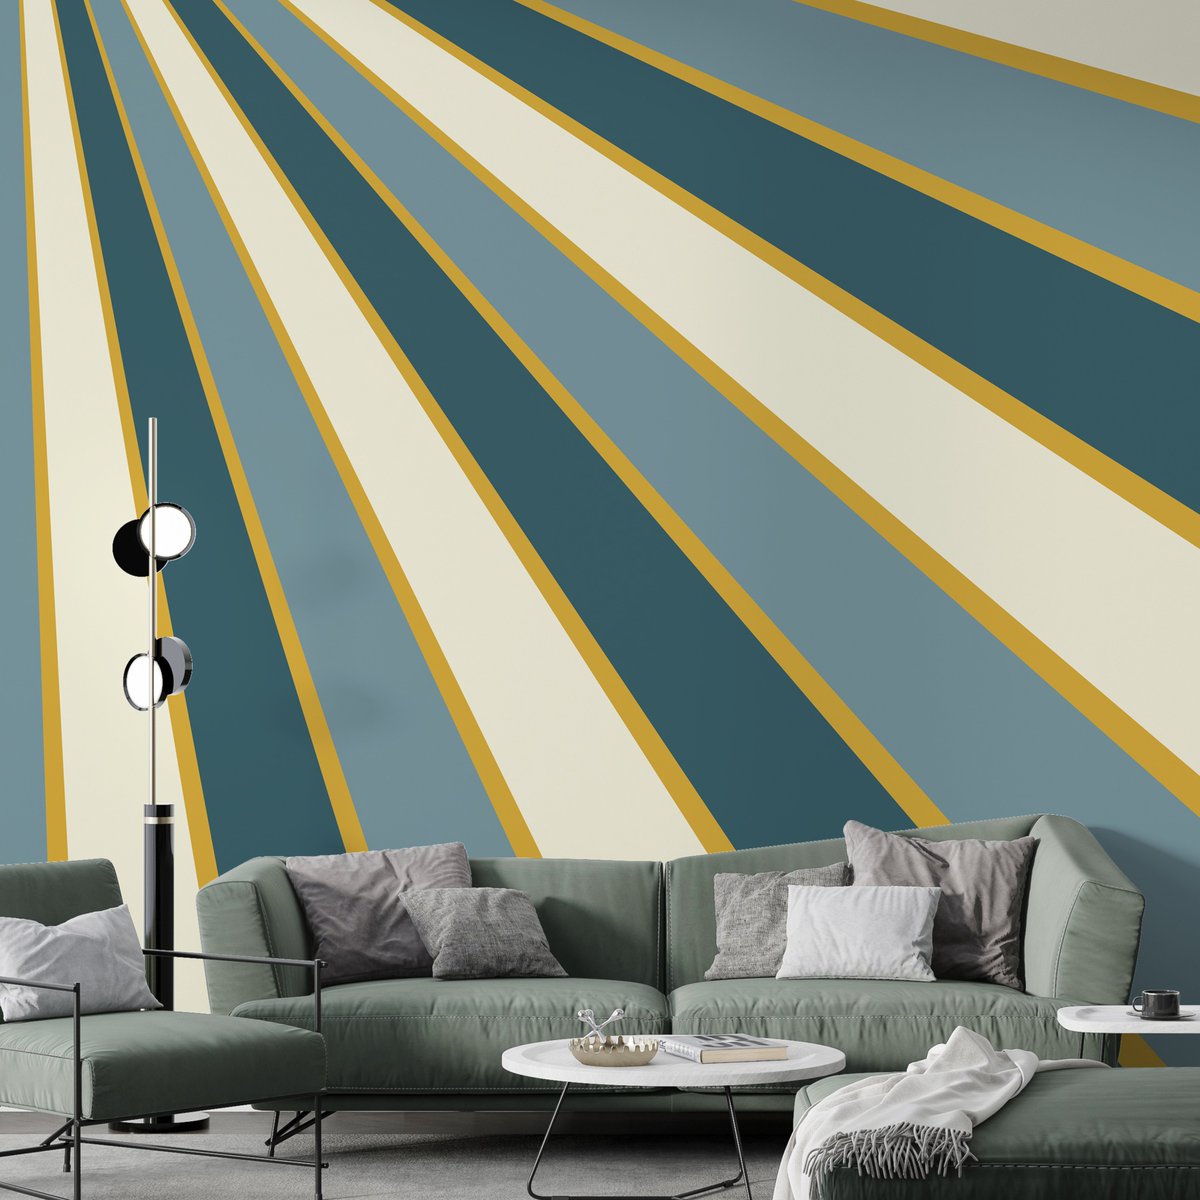 Brighten up your room with Colorful Striped Peel and Stick Wallpaper Murals! 🌈#HomeStyle #WallDecor #Stripes #DIYHome #ColorfulHome #EasyDecor #RoomRefresh #walldecor #interiordesign #wallpaperforwalls #selfadhesivewallpaper #wallmurals

bit.ly/3weSJW8